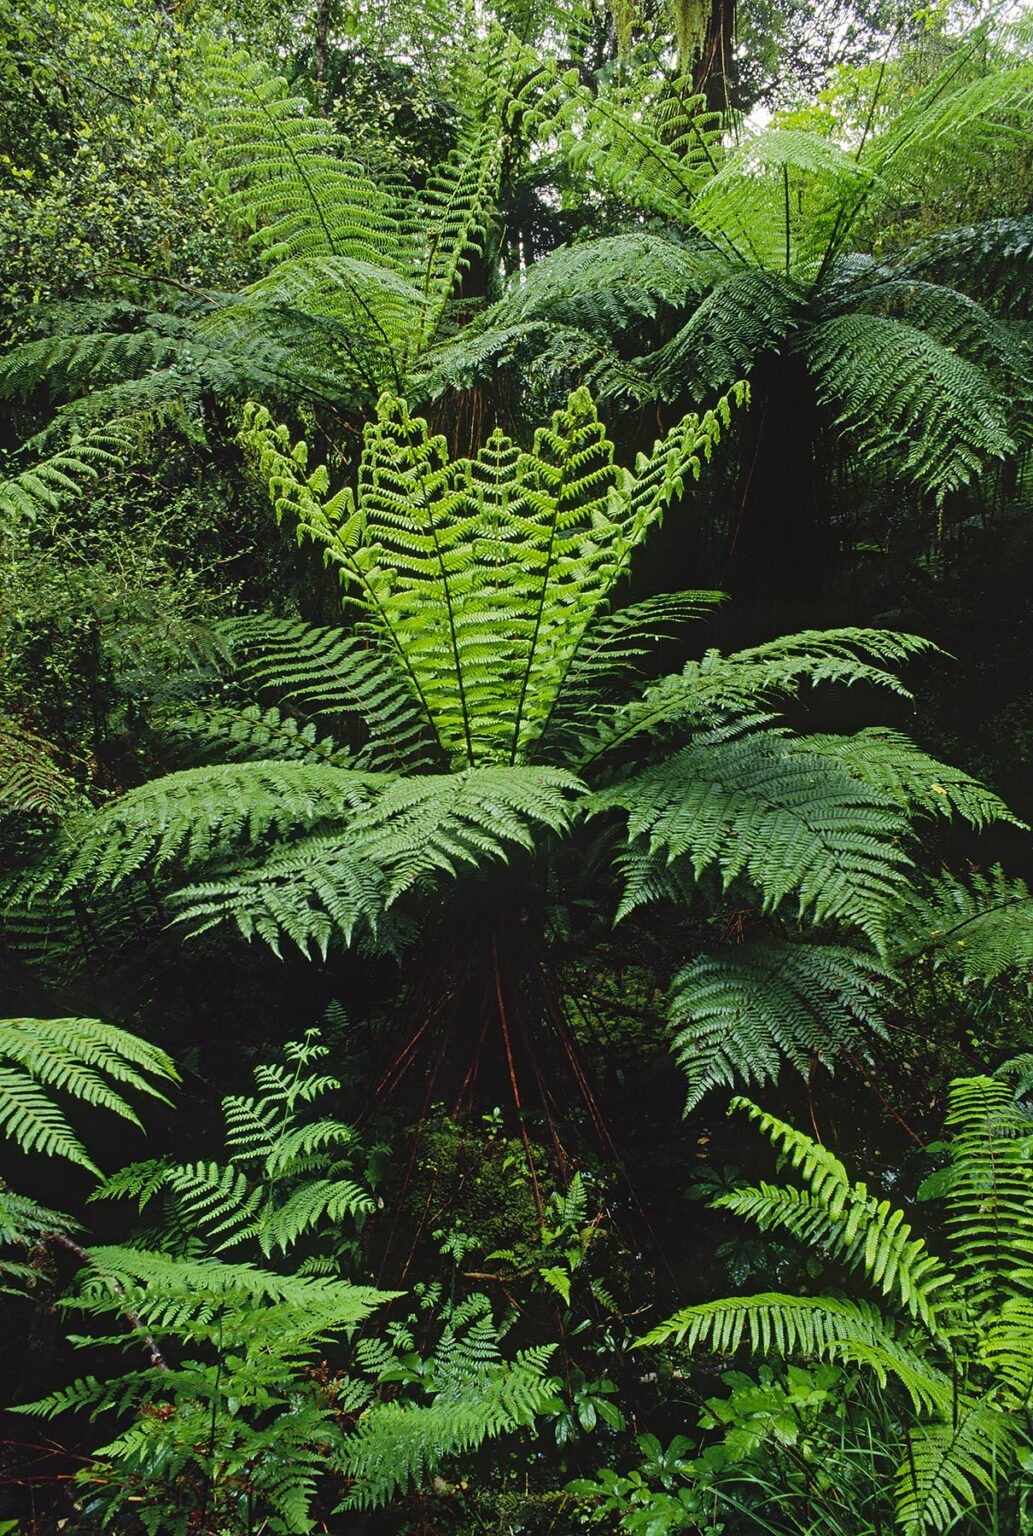 The RAIN FORESTS of the SOUTH ISLANDS west side contain hundreds of species of FERNS as seen in this photo - NEW ZEALAND